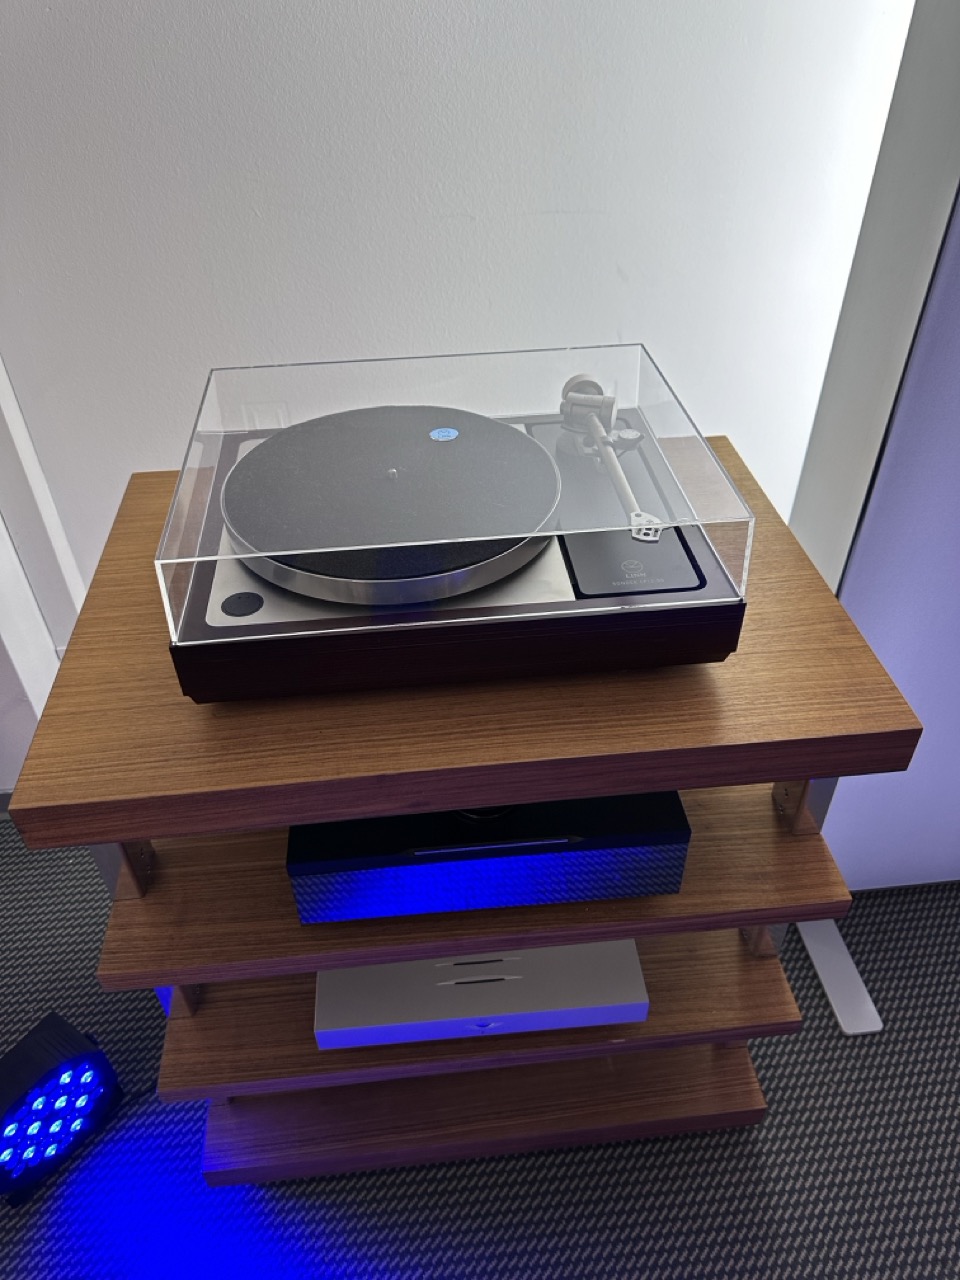 The Linn Sondek turntable, beautifully displayed. Once of my favourites.